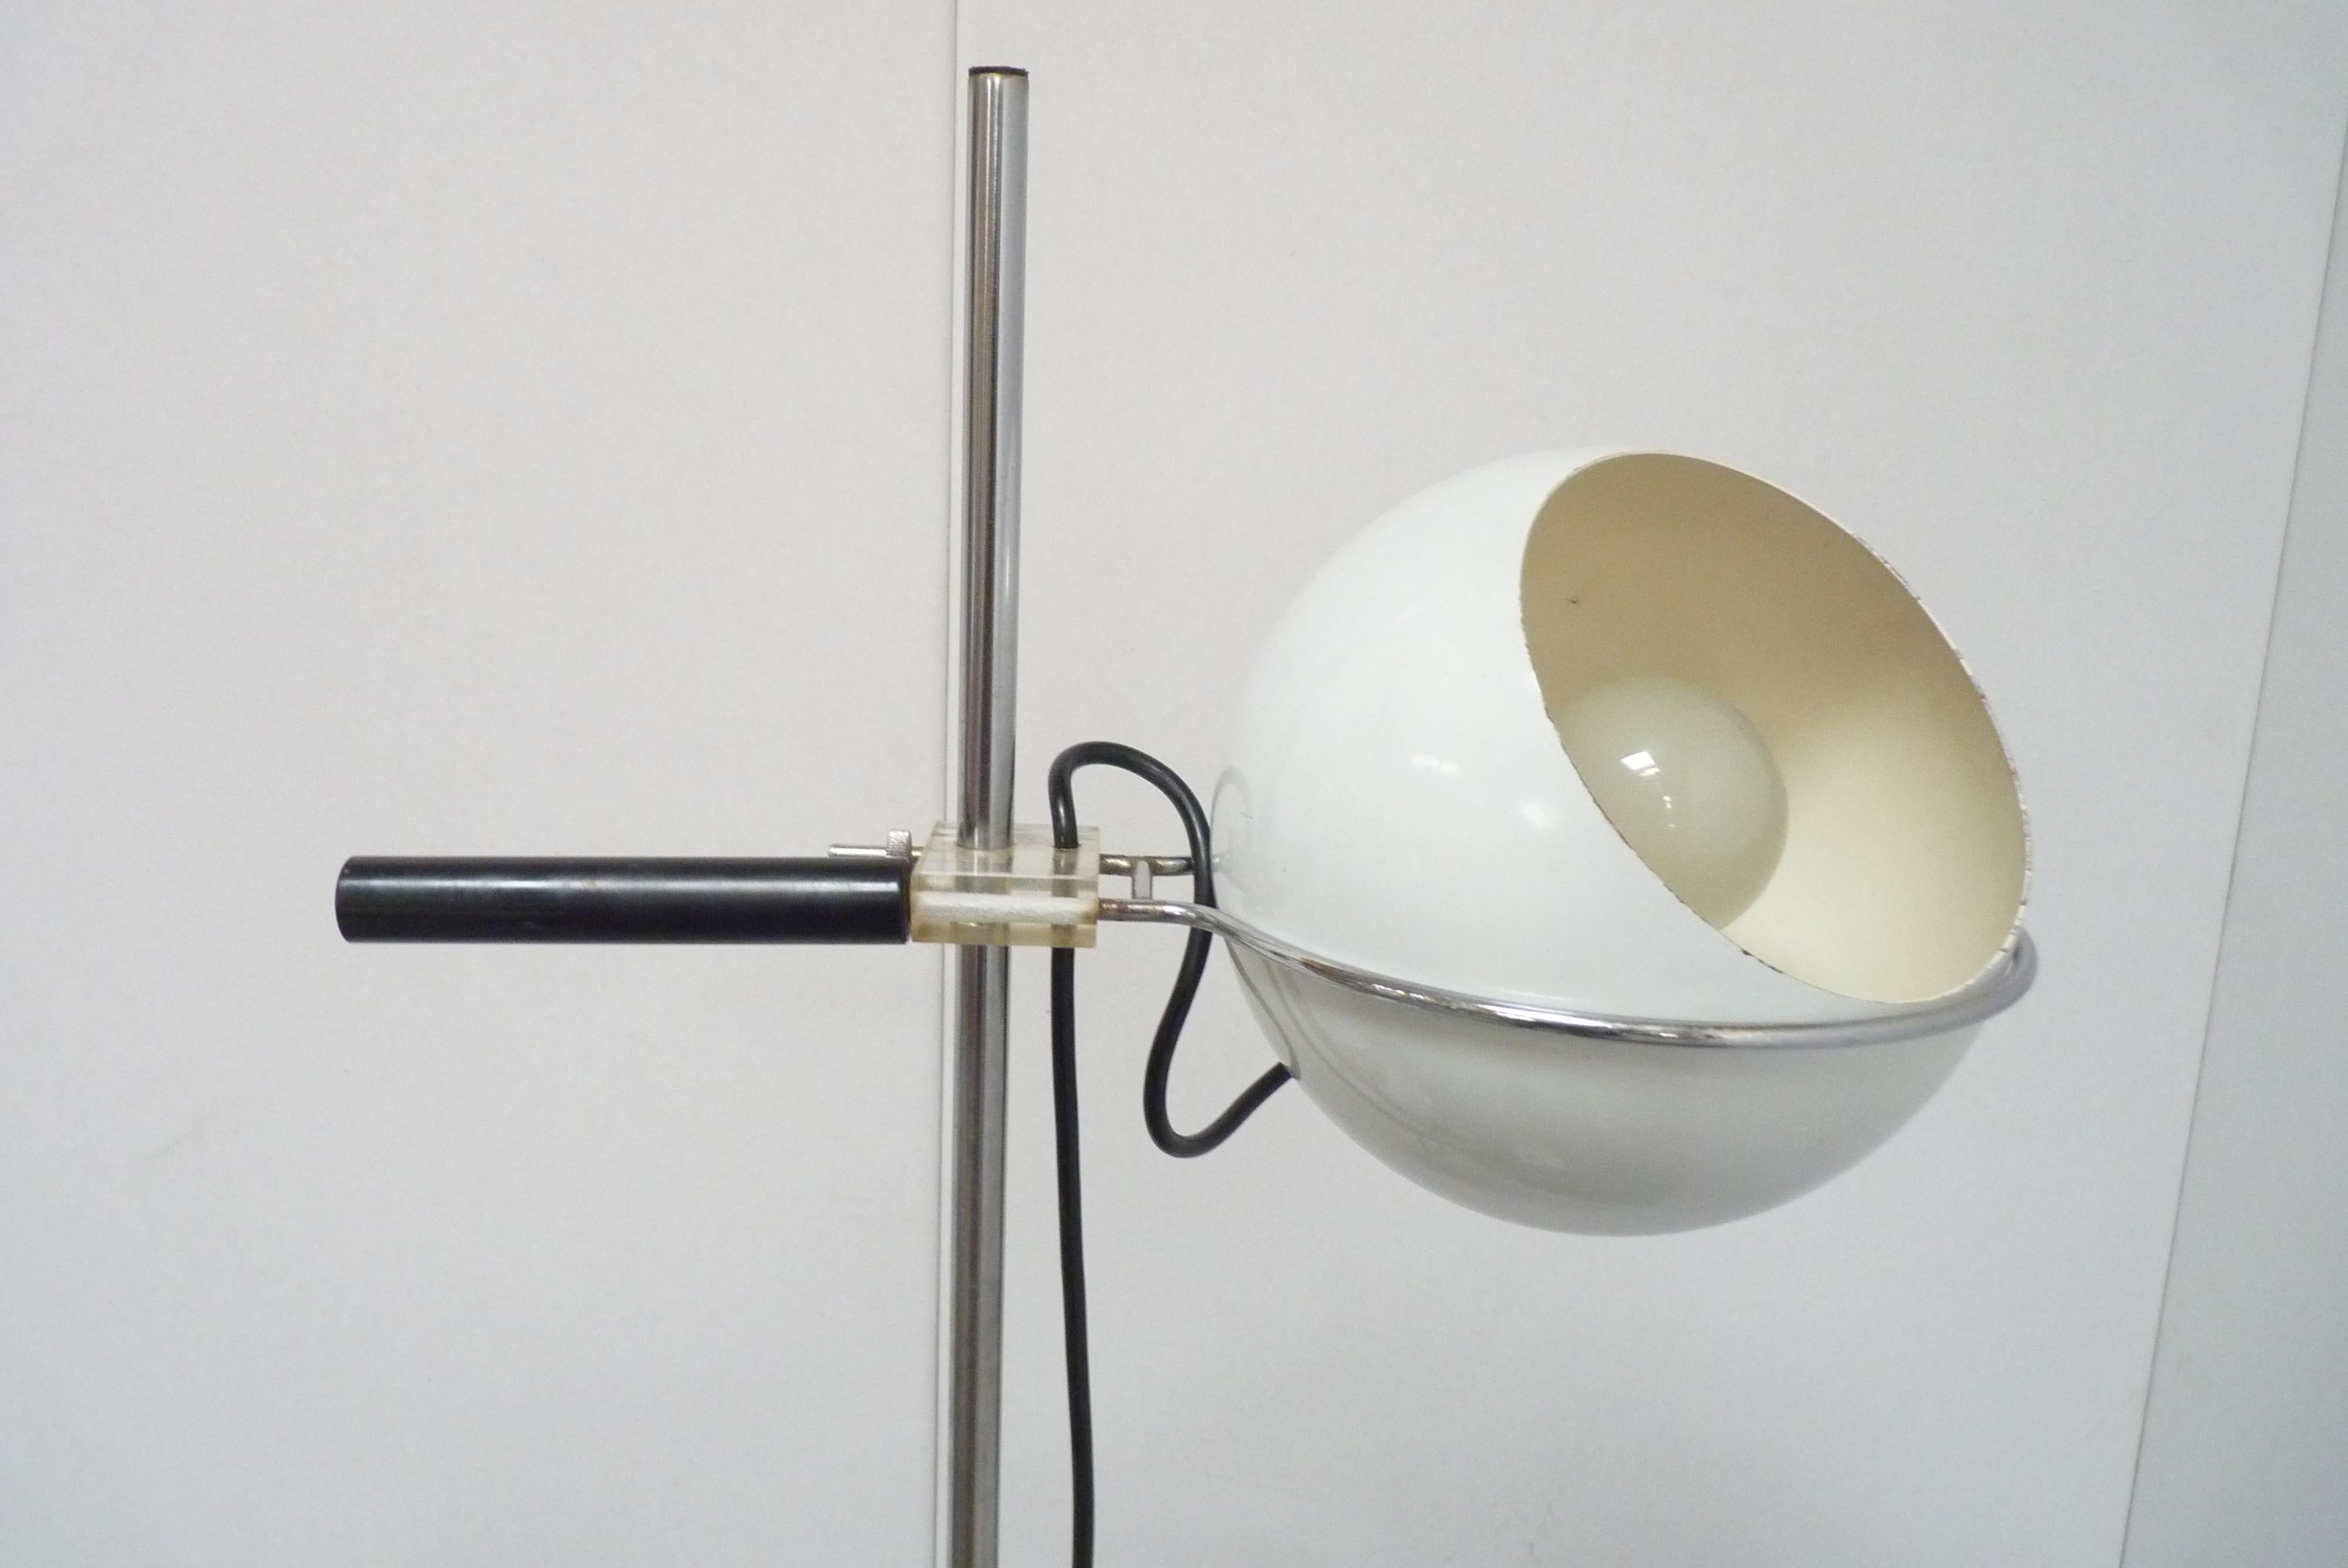 Mid-20th Century 'Napoli' Eyeball Floor Lamp by Gepo Lighting, The Netherlands, 1960s For Sale